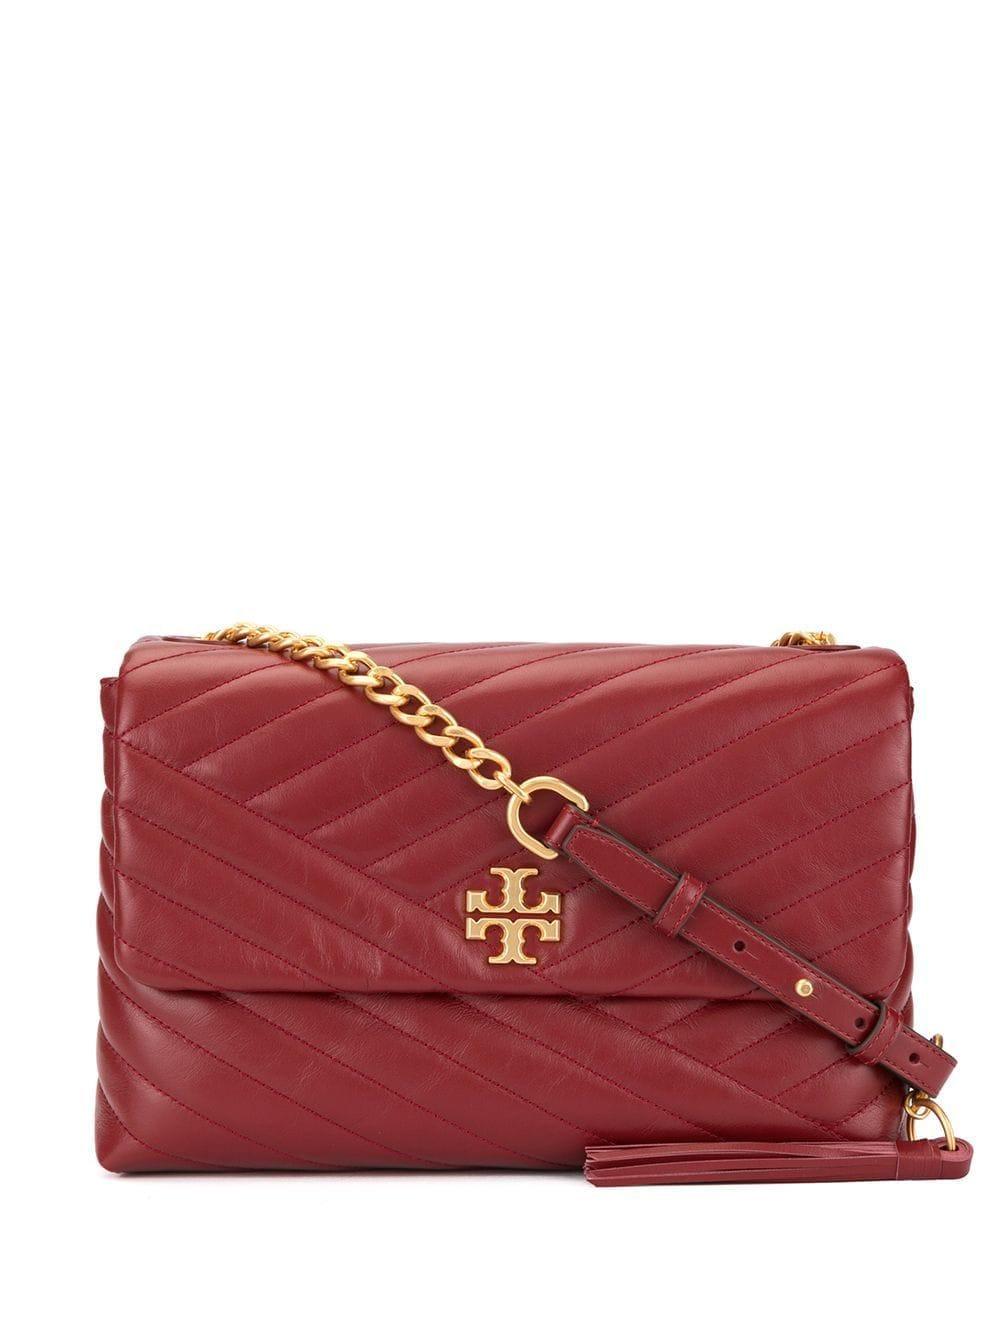 Tory Burch Leather Kira Chevron Flap Shoulder Bag in Red - Lyst